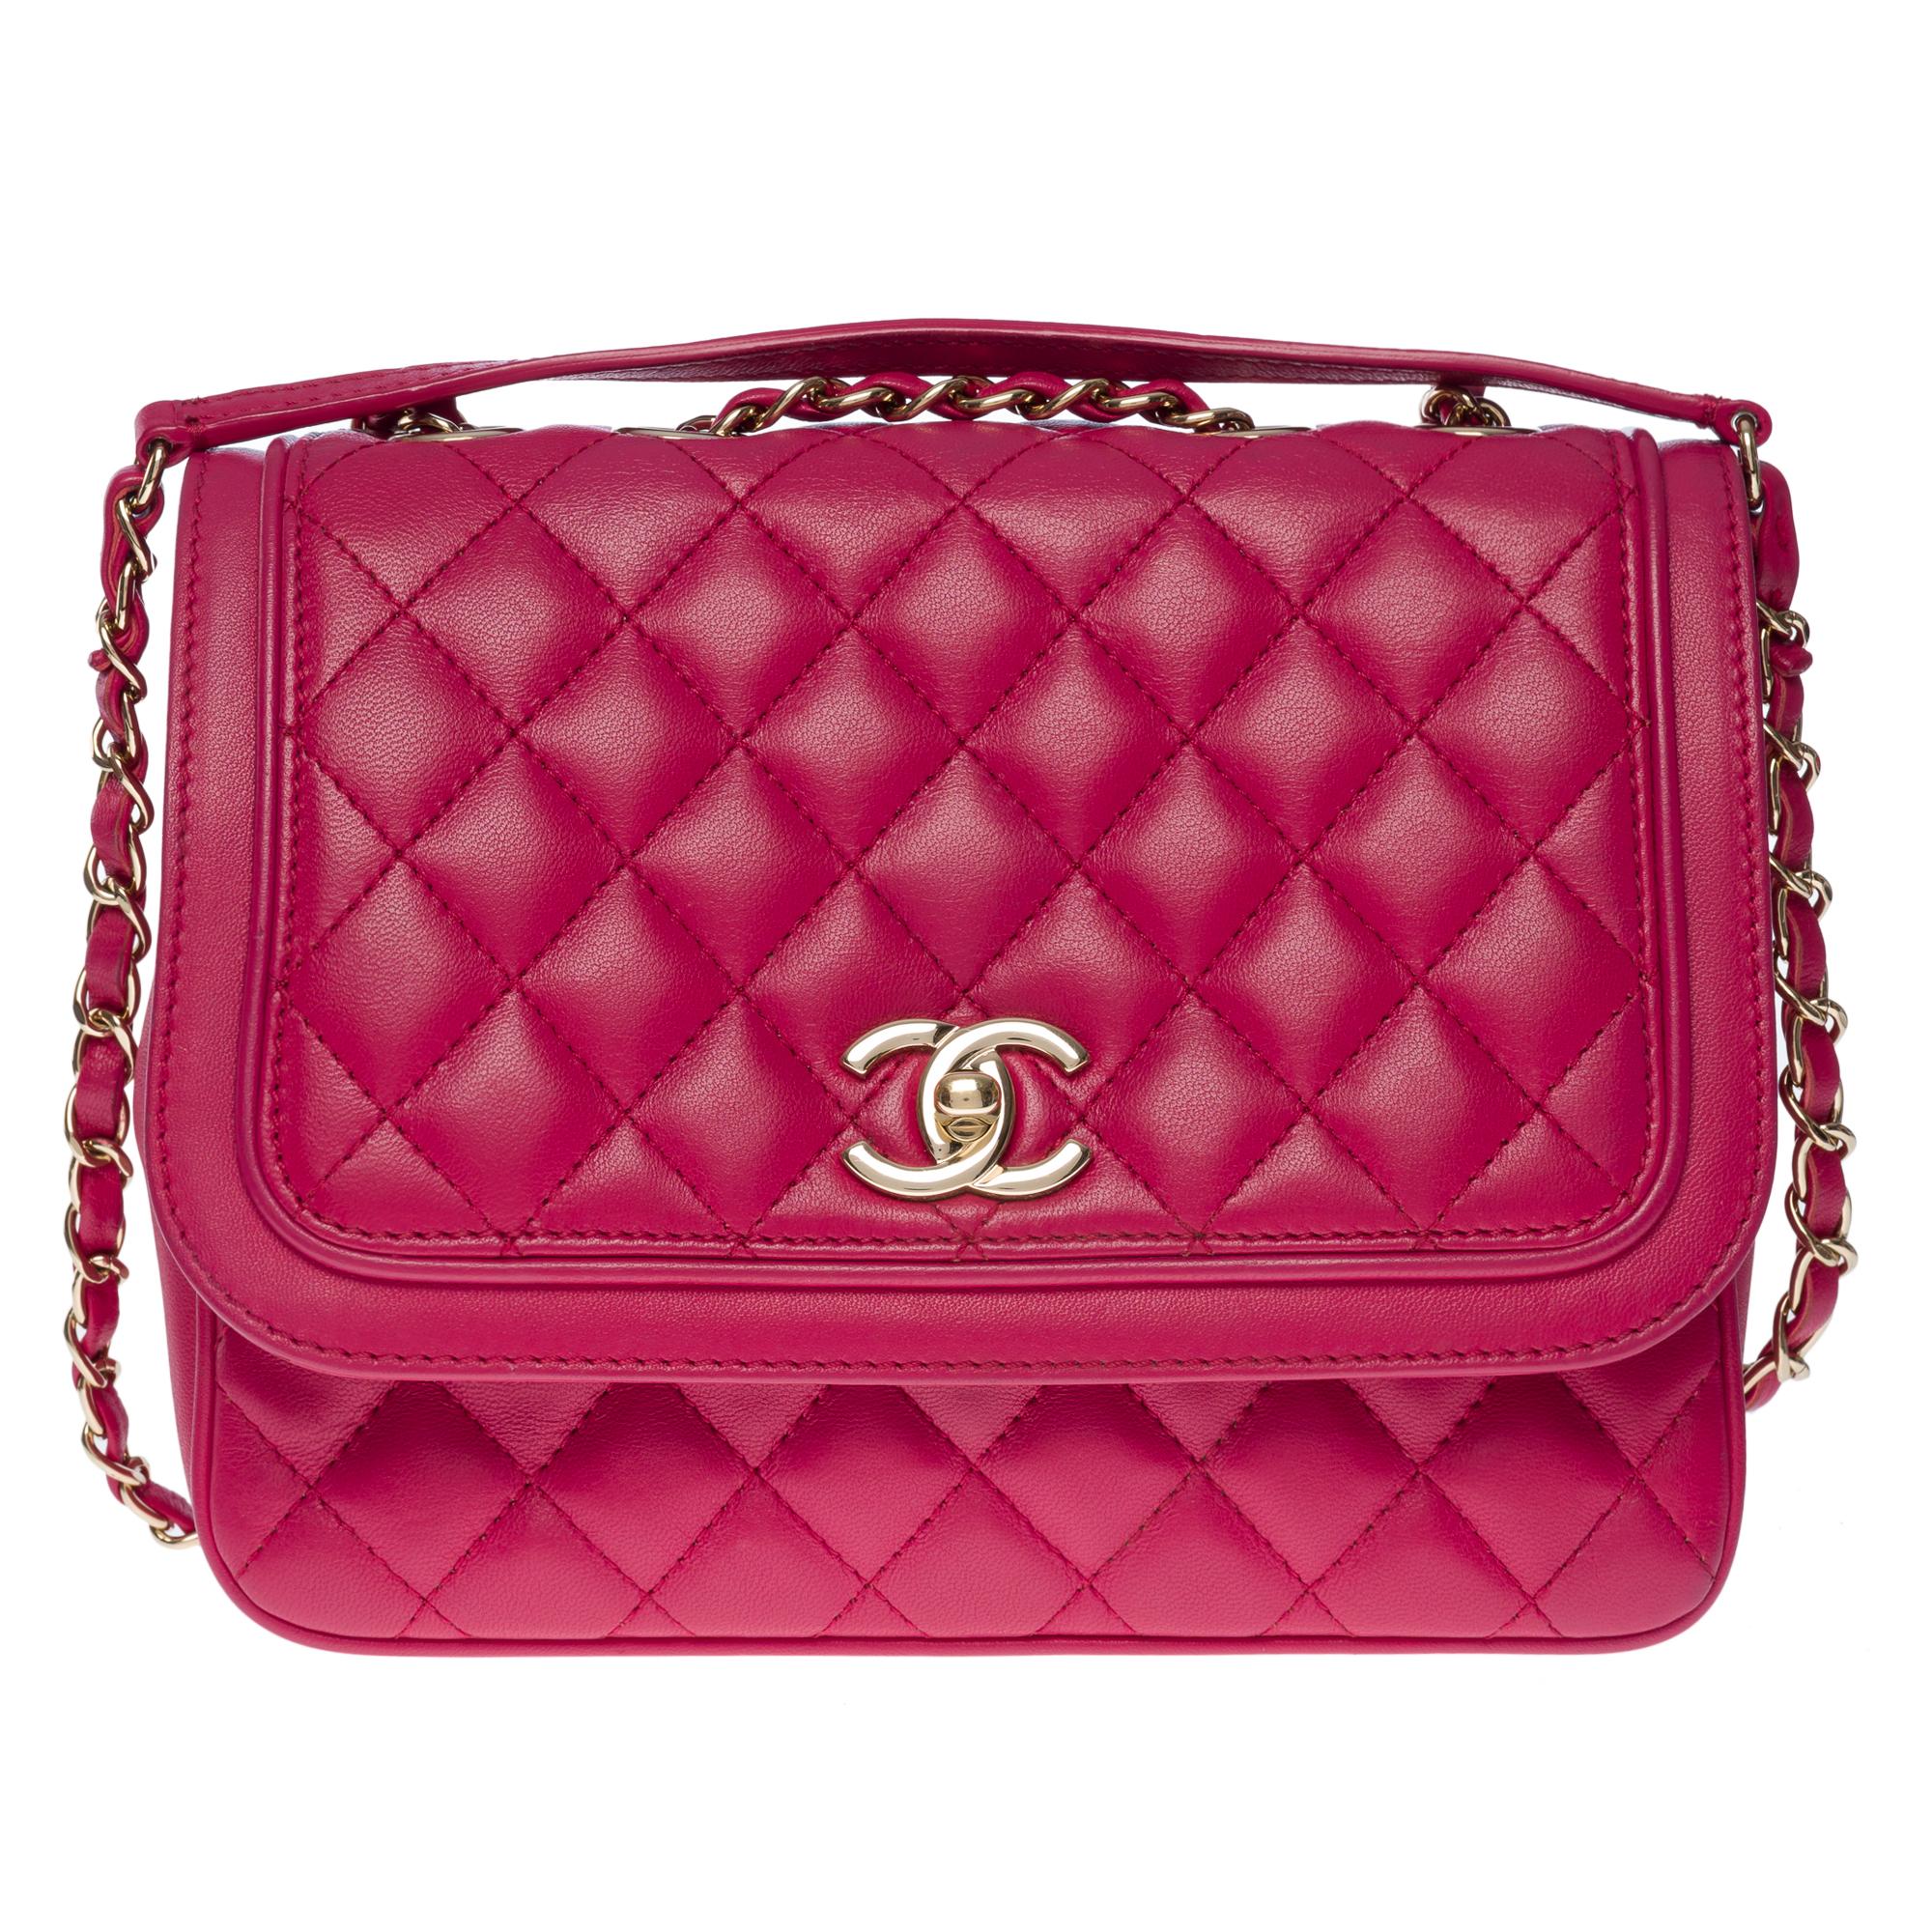 Very Gorgeous Chanel Classic shoulder flap bag in pink quilted lambskin leather, champagne metal hardware, a champagne metal chain handle interlaced with ruby pink leather for a shoulder or crossbody

Fabric patch pocket on back of bag
Flap closure,